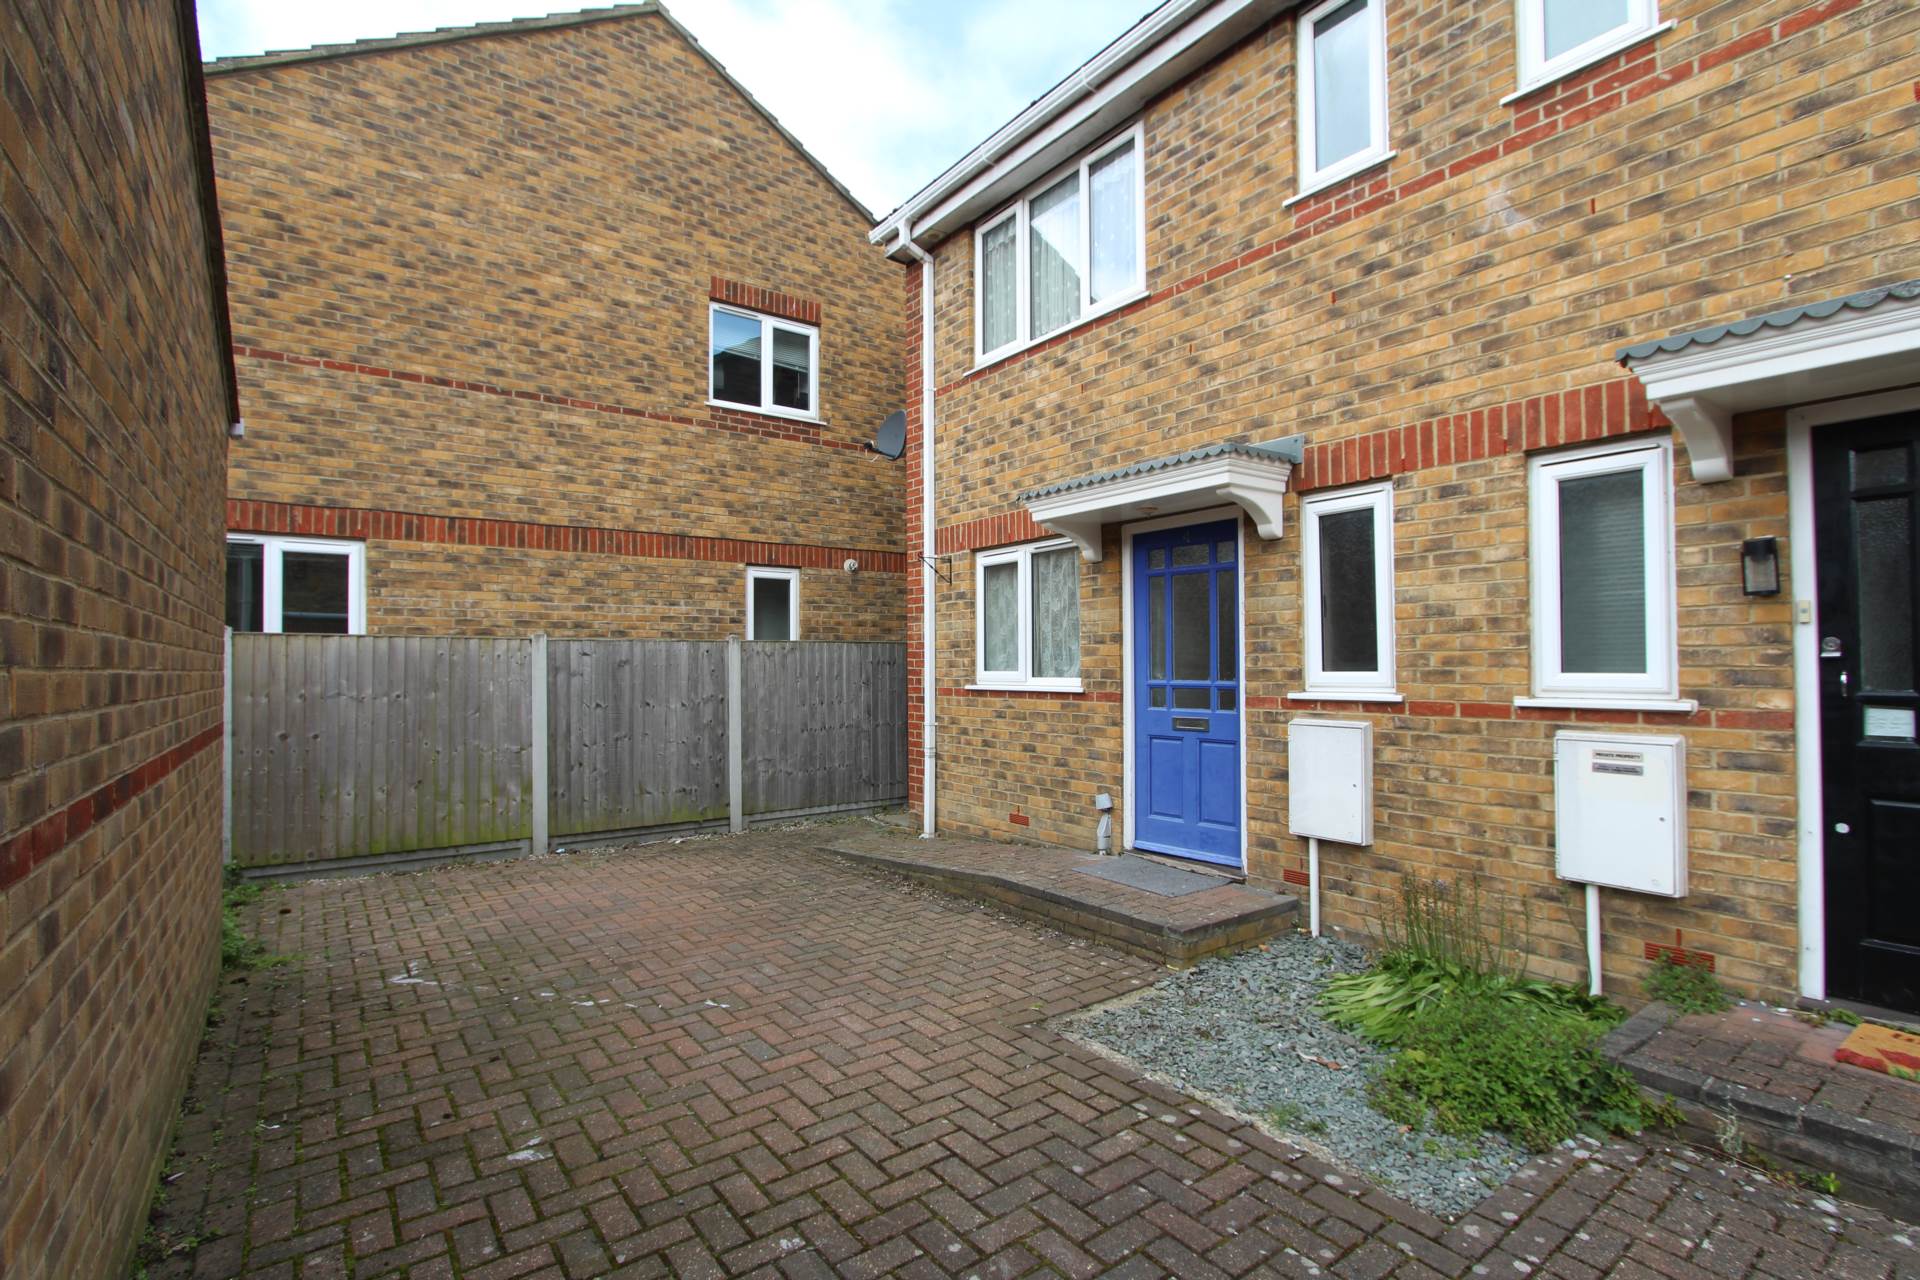 3 bed Semi-Detached House for rent in Southend On Sea. From Robert Michael